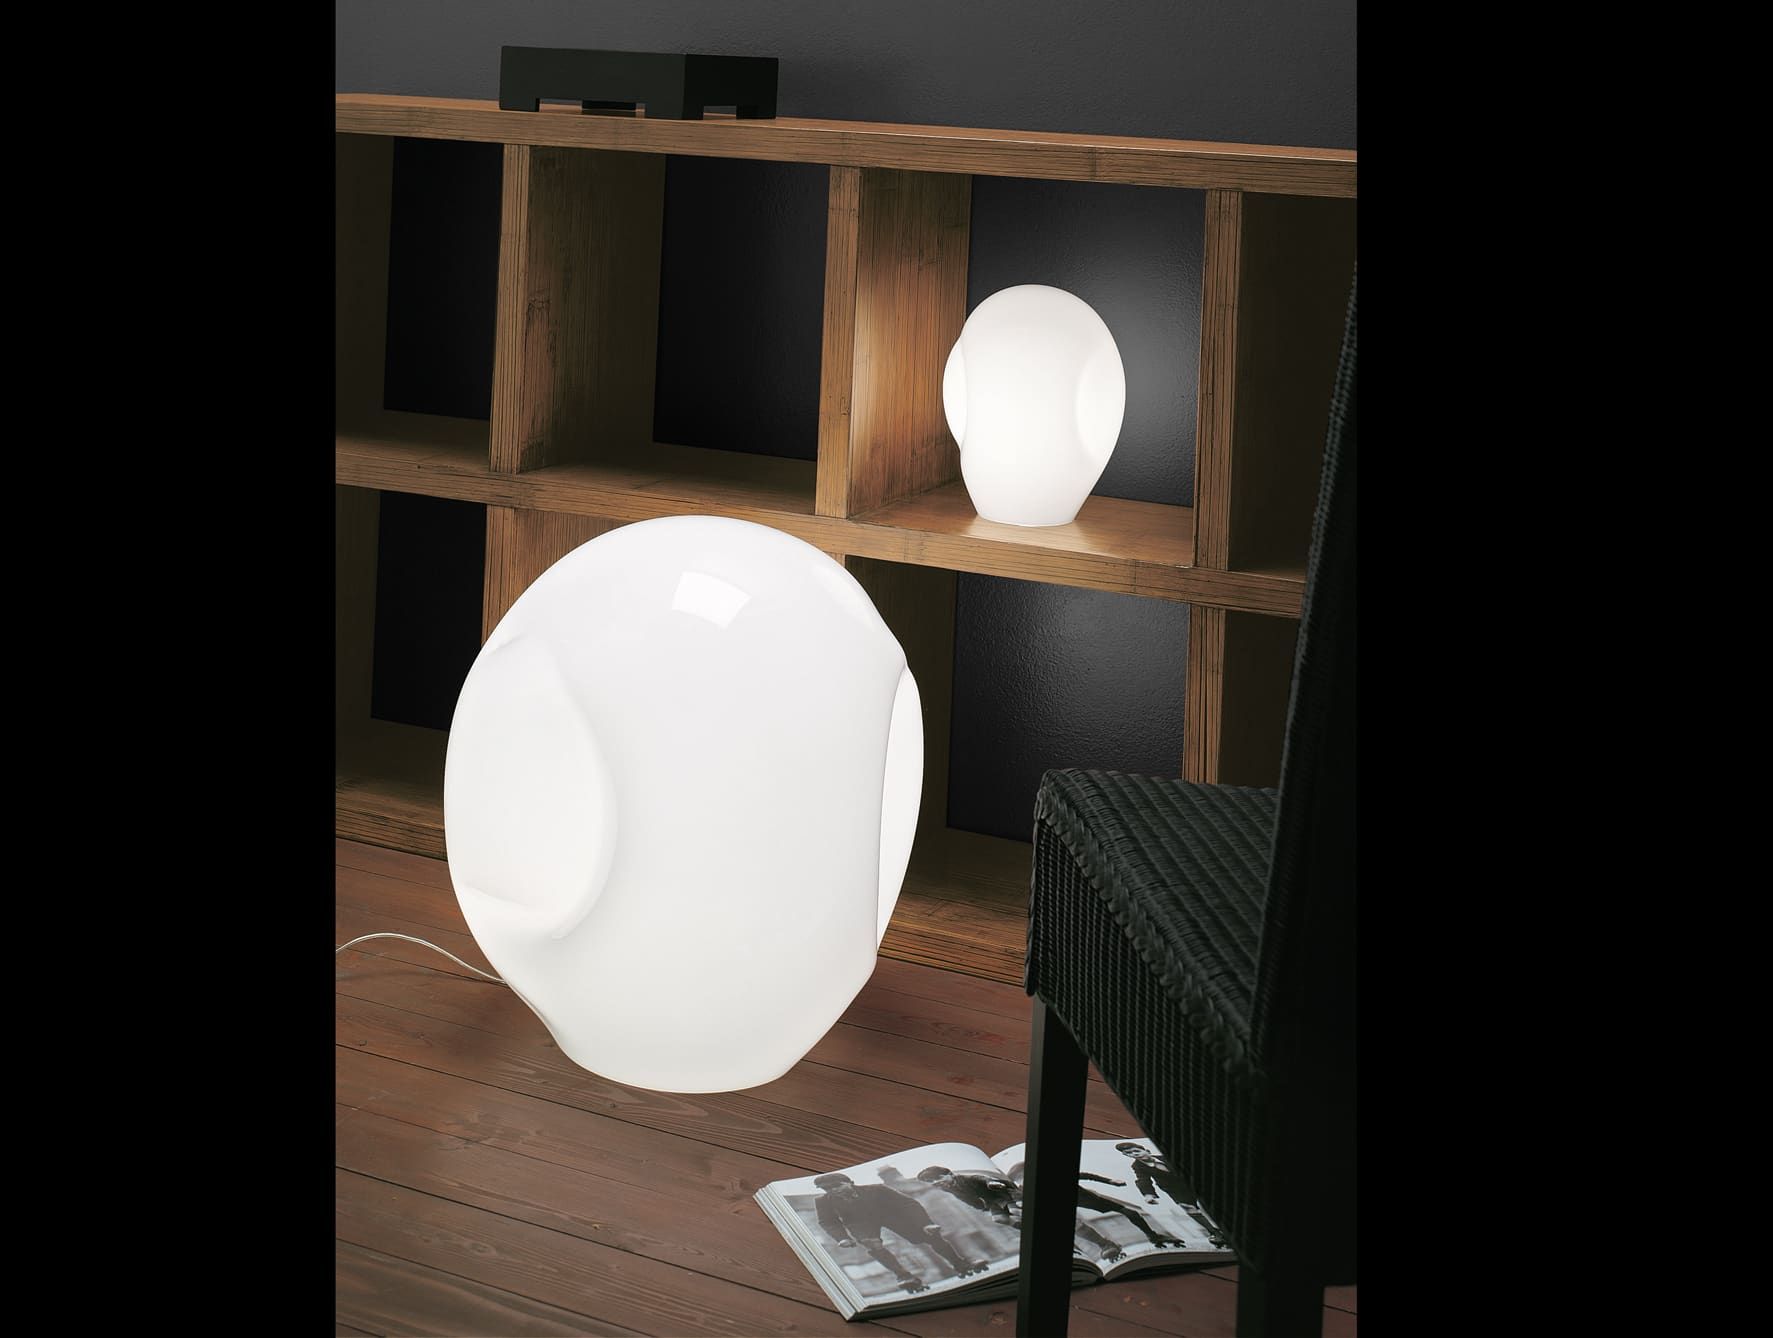 Munega modern luxury table lamp with white glass